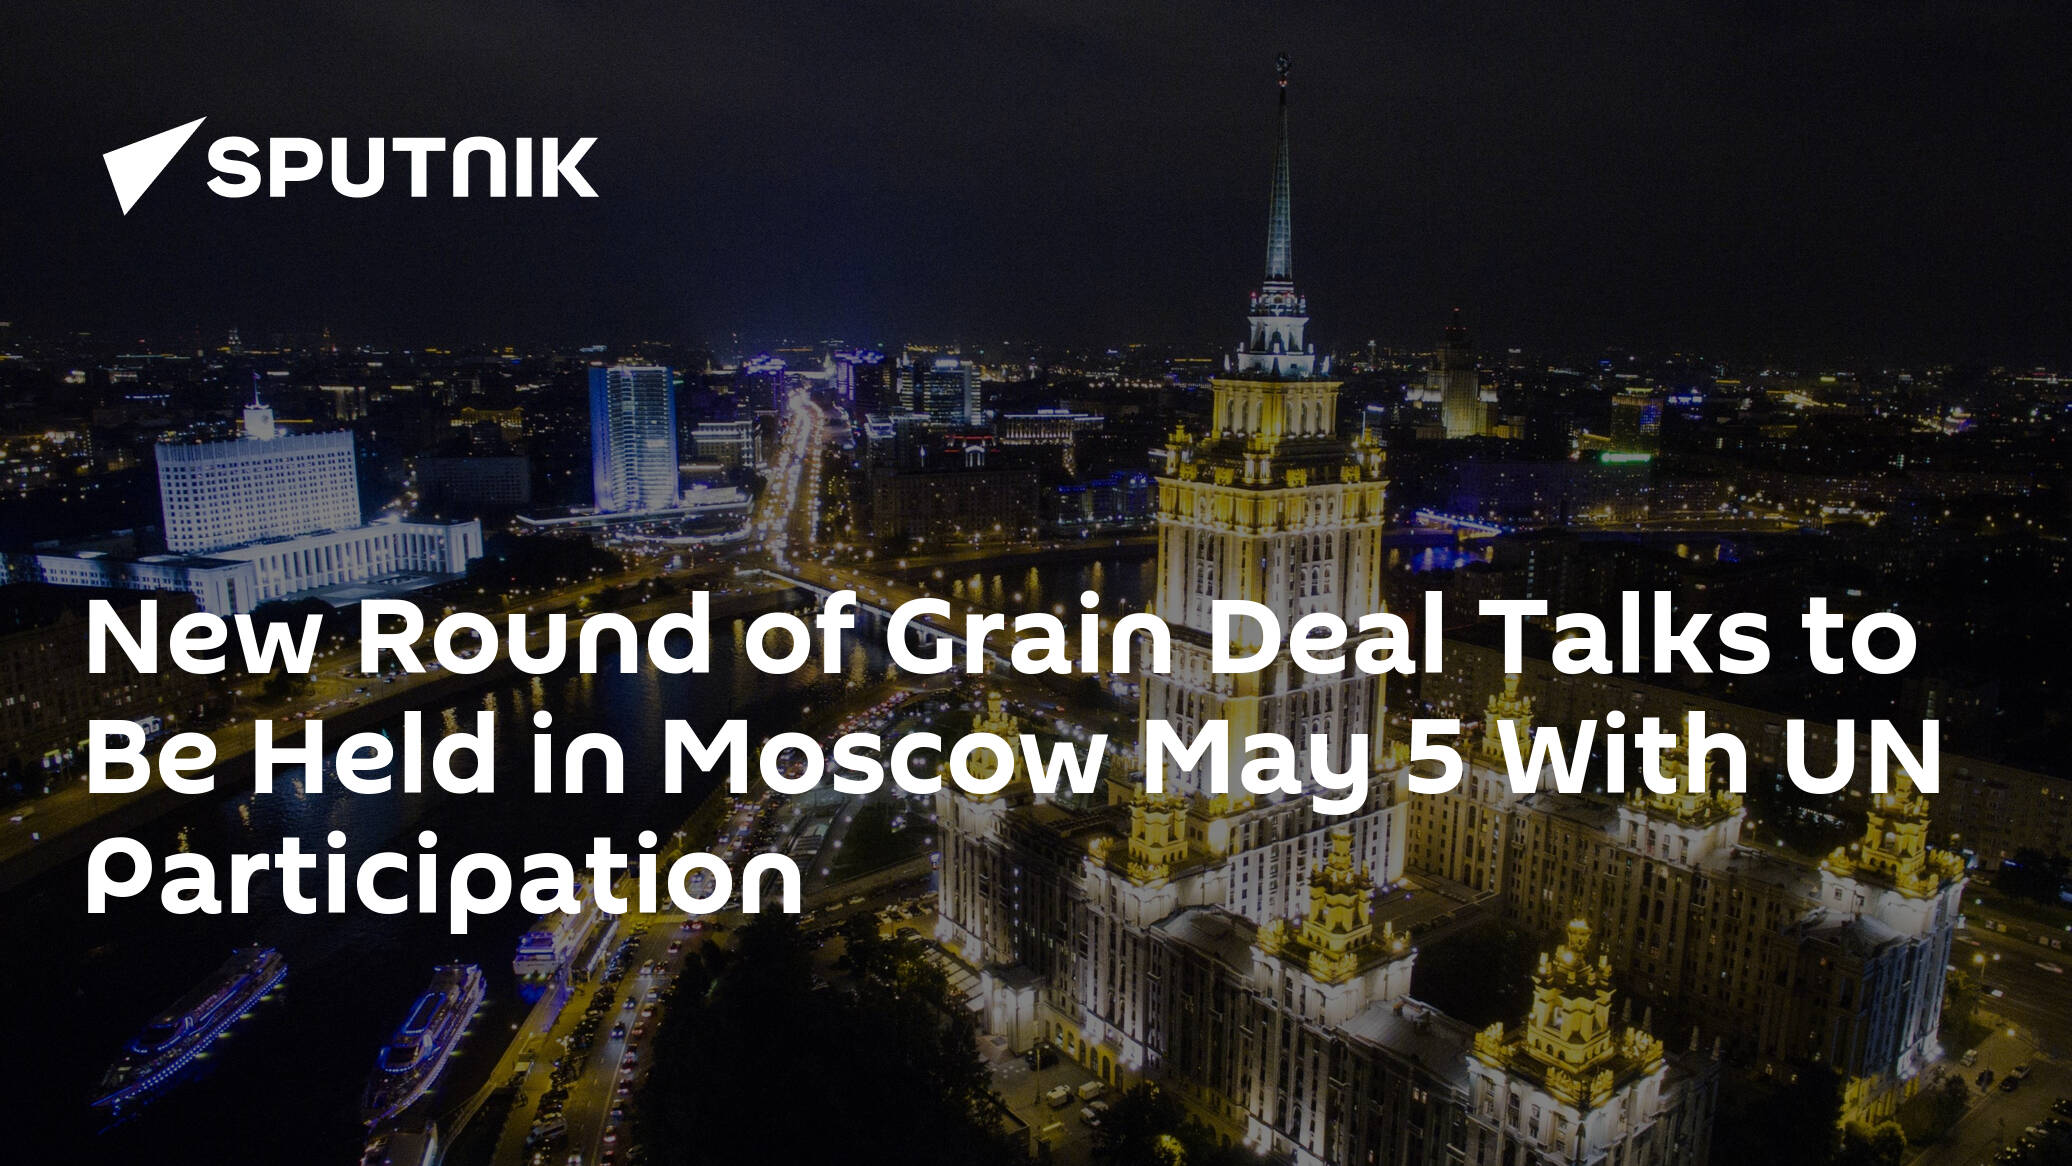 New Round of Grain Deal Talks to Be Held in Moscow May 5 With UN Participation